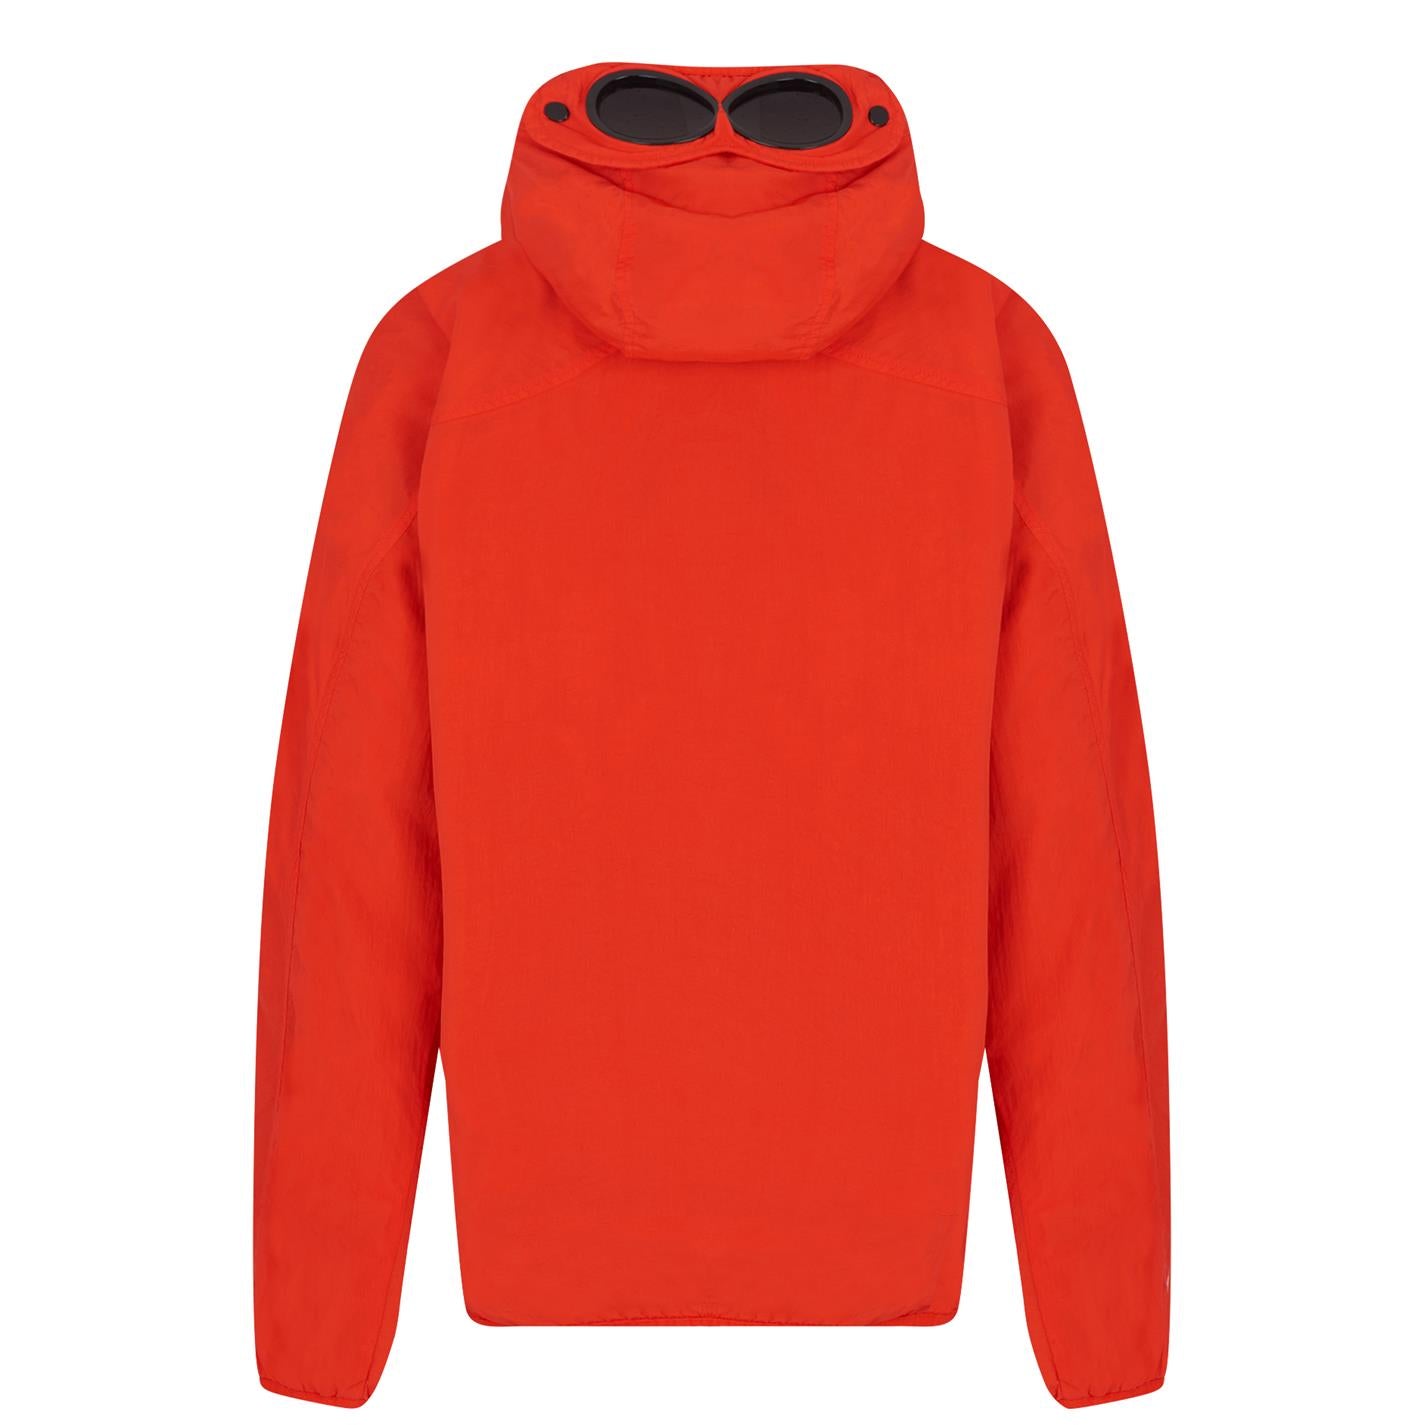 Kids CP Company Garment Dyed CR-L Goggle Jacket - DANYOUNGUK